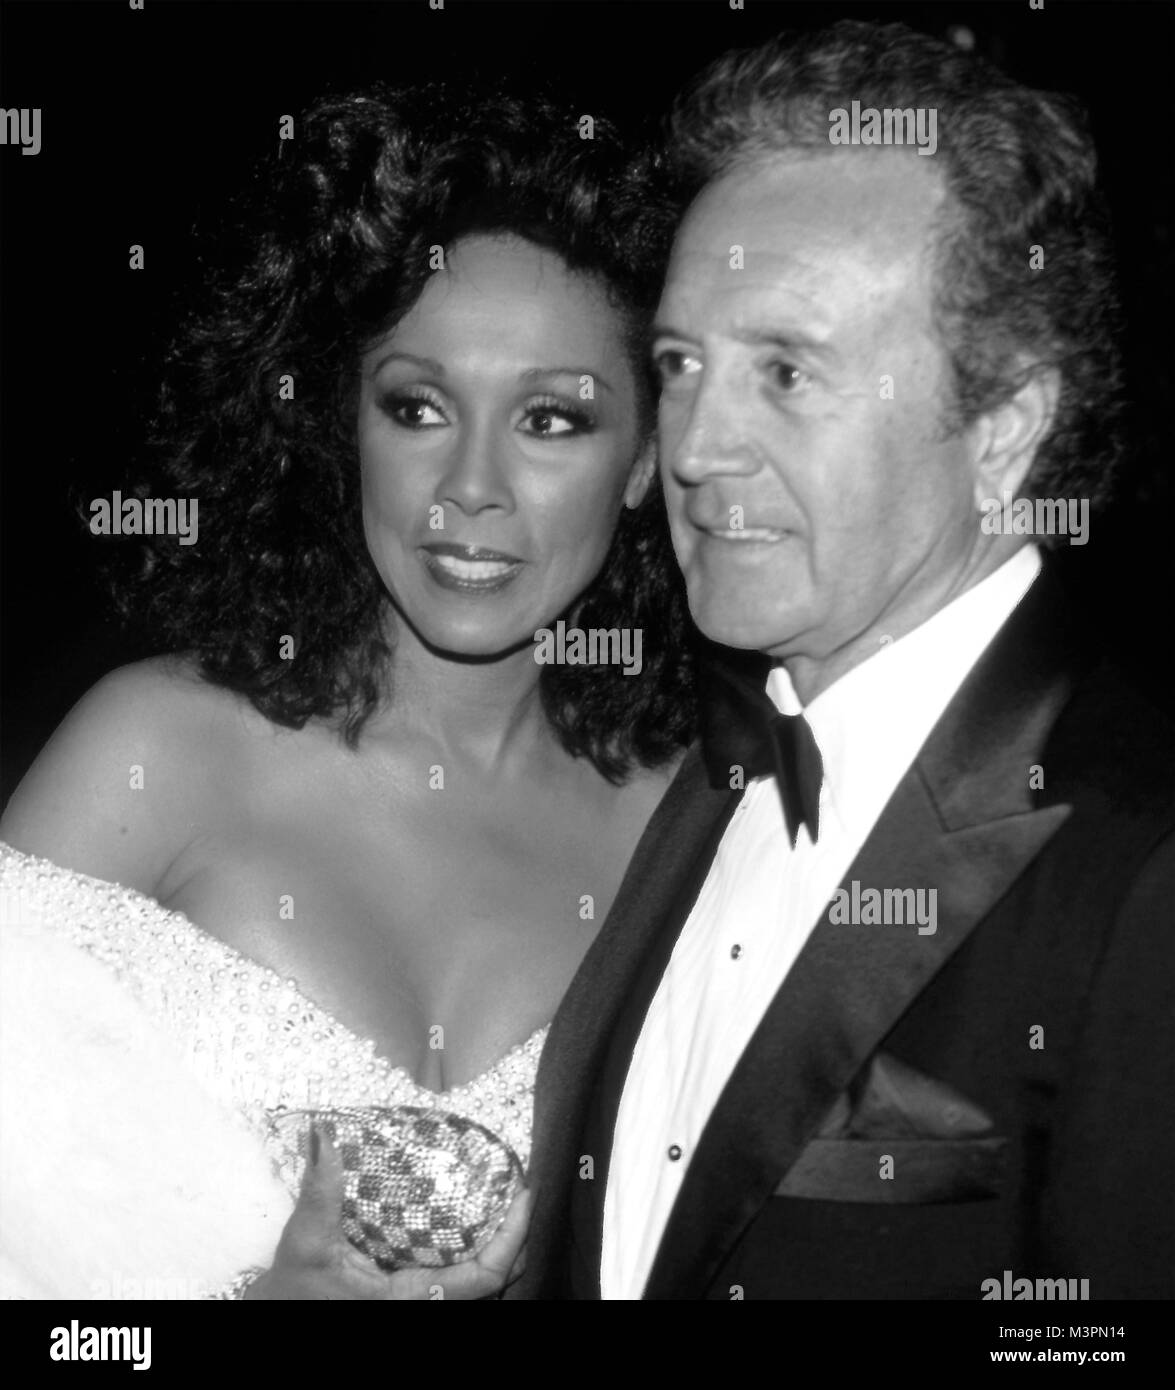 Diahann Carroll and Vic Damone attend 38th Annual Primetime Emmy Awards on September 21, 1986 at the Pasadena Civic Auditorium in Pasadena, California. Credit: Walter McBride/MediaPunch Stock Photo